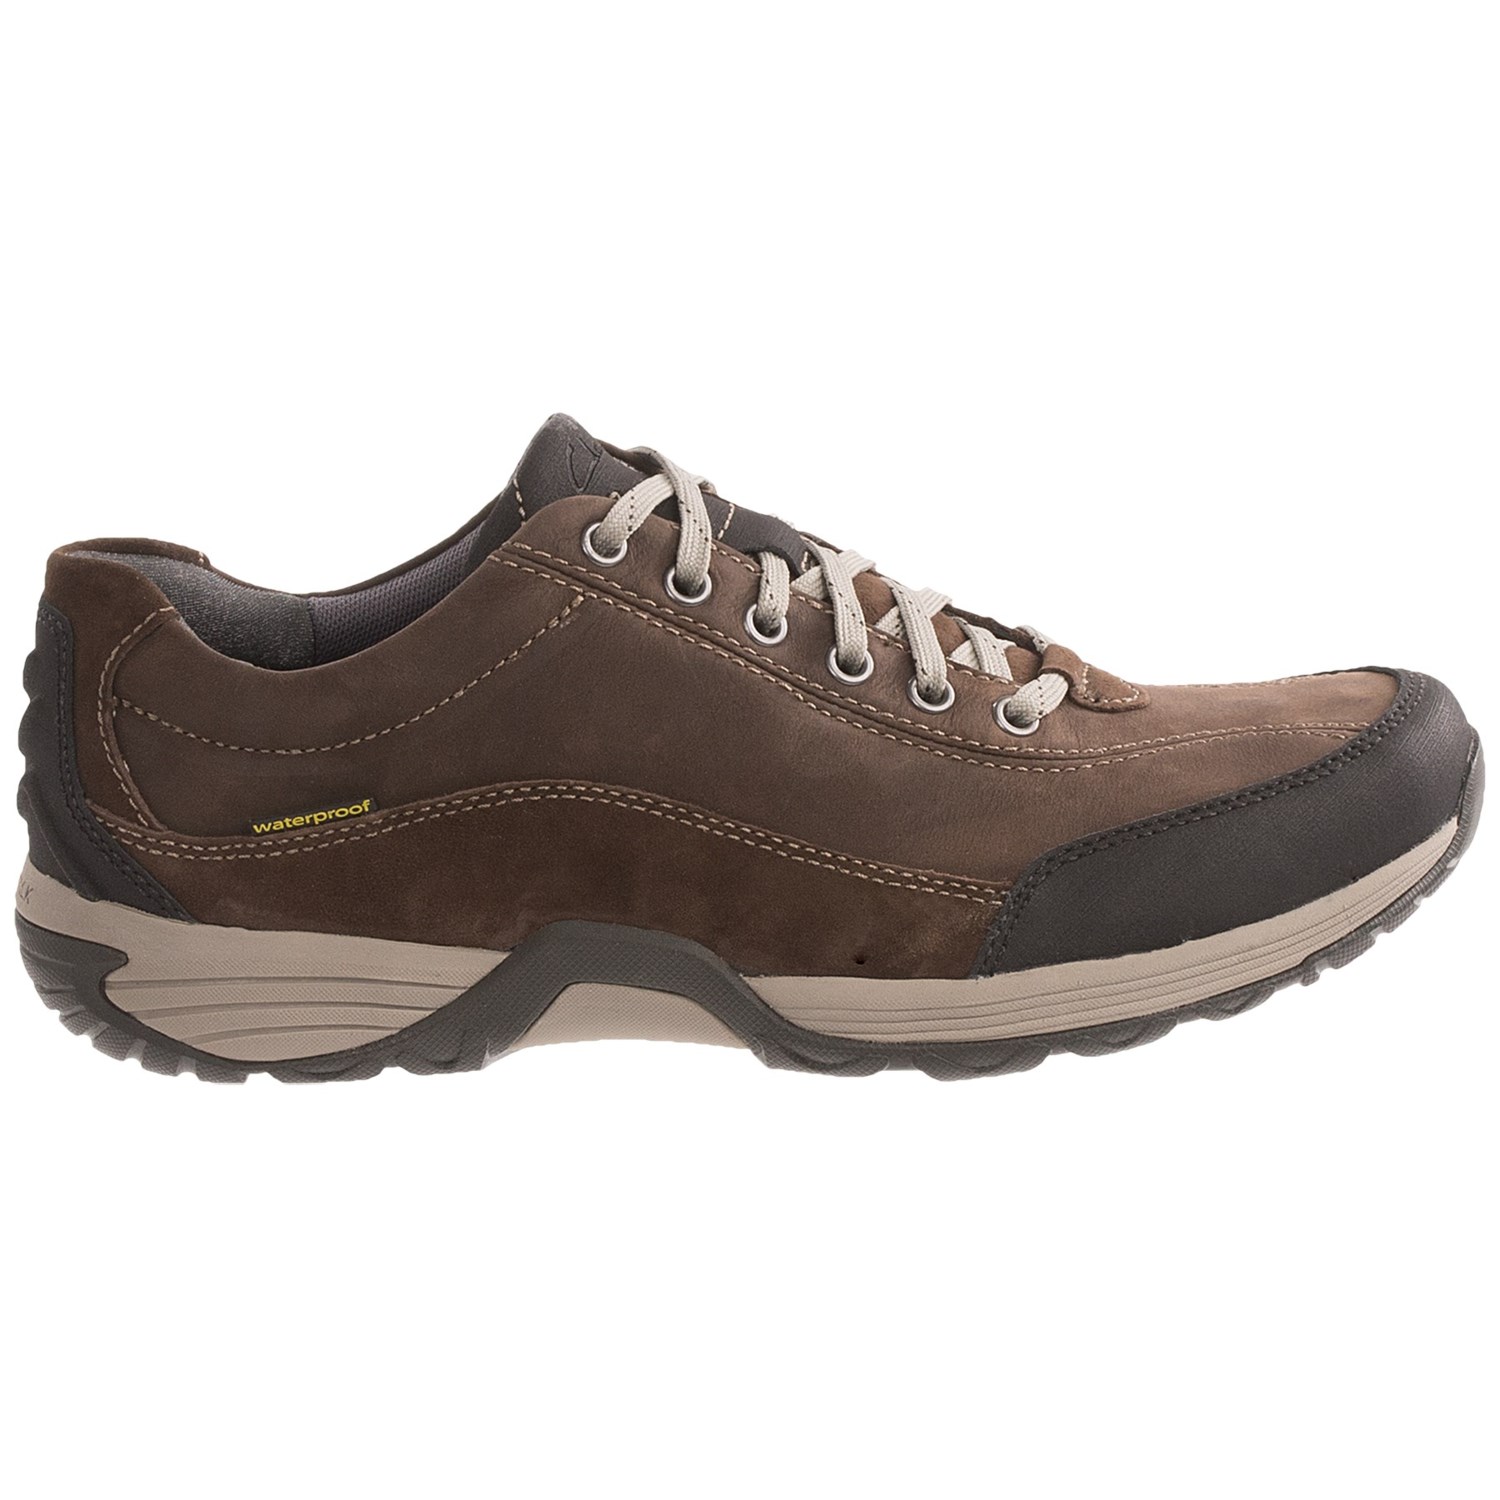 Clarks Wave.Pioneer Shoes (For Men) 7138G - Save 43%